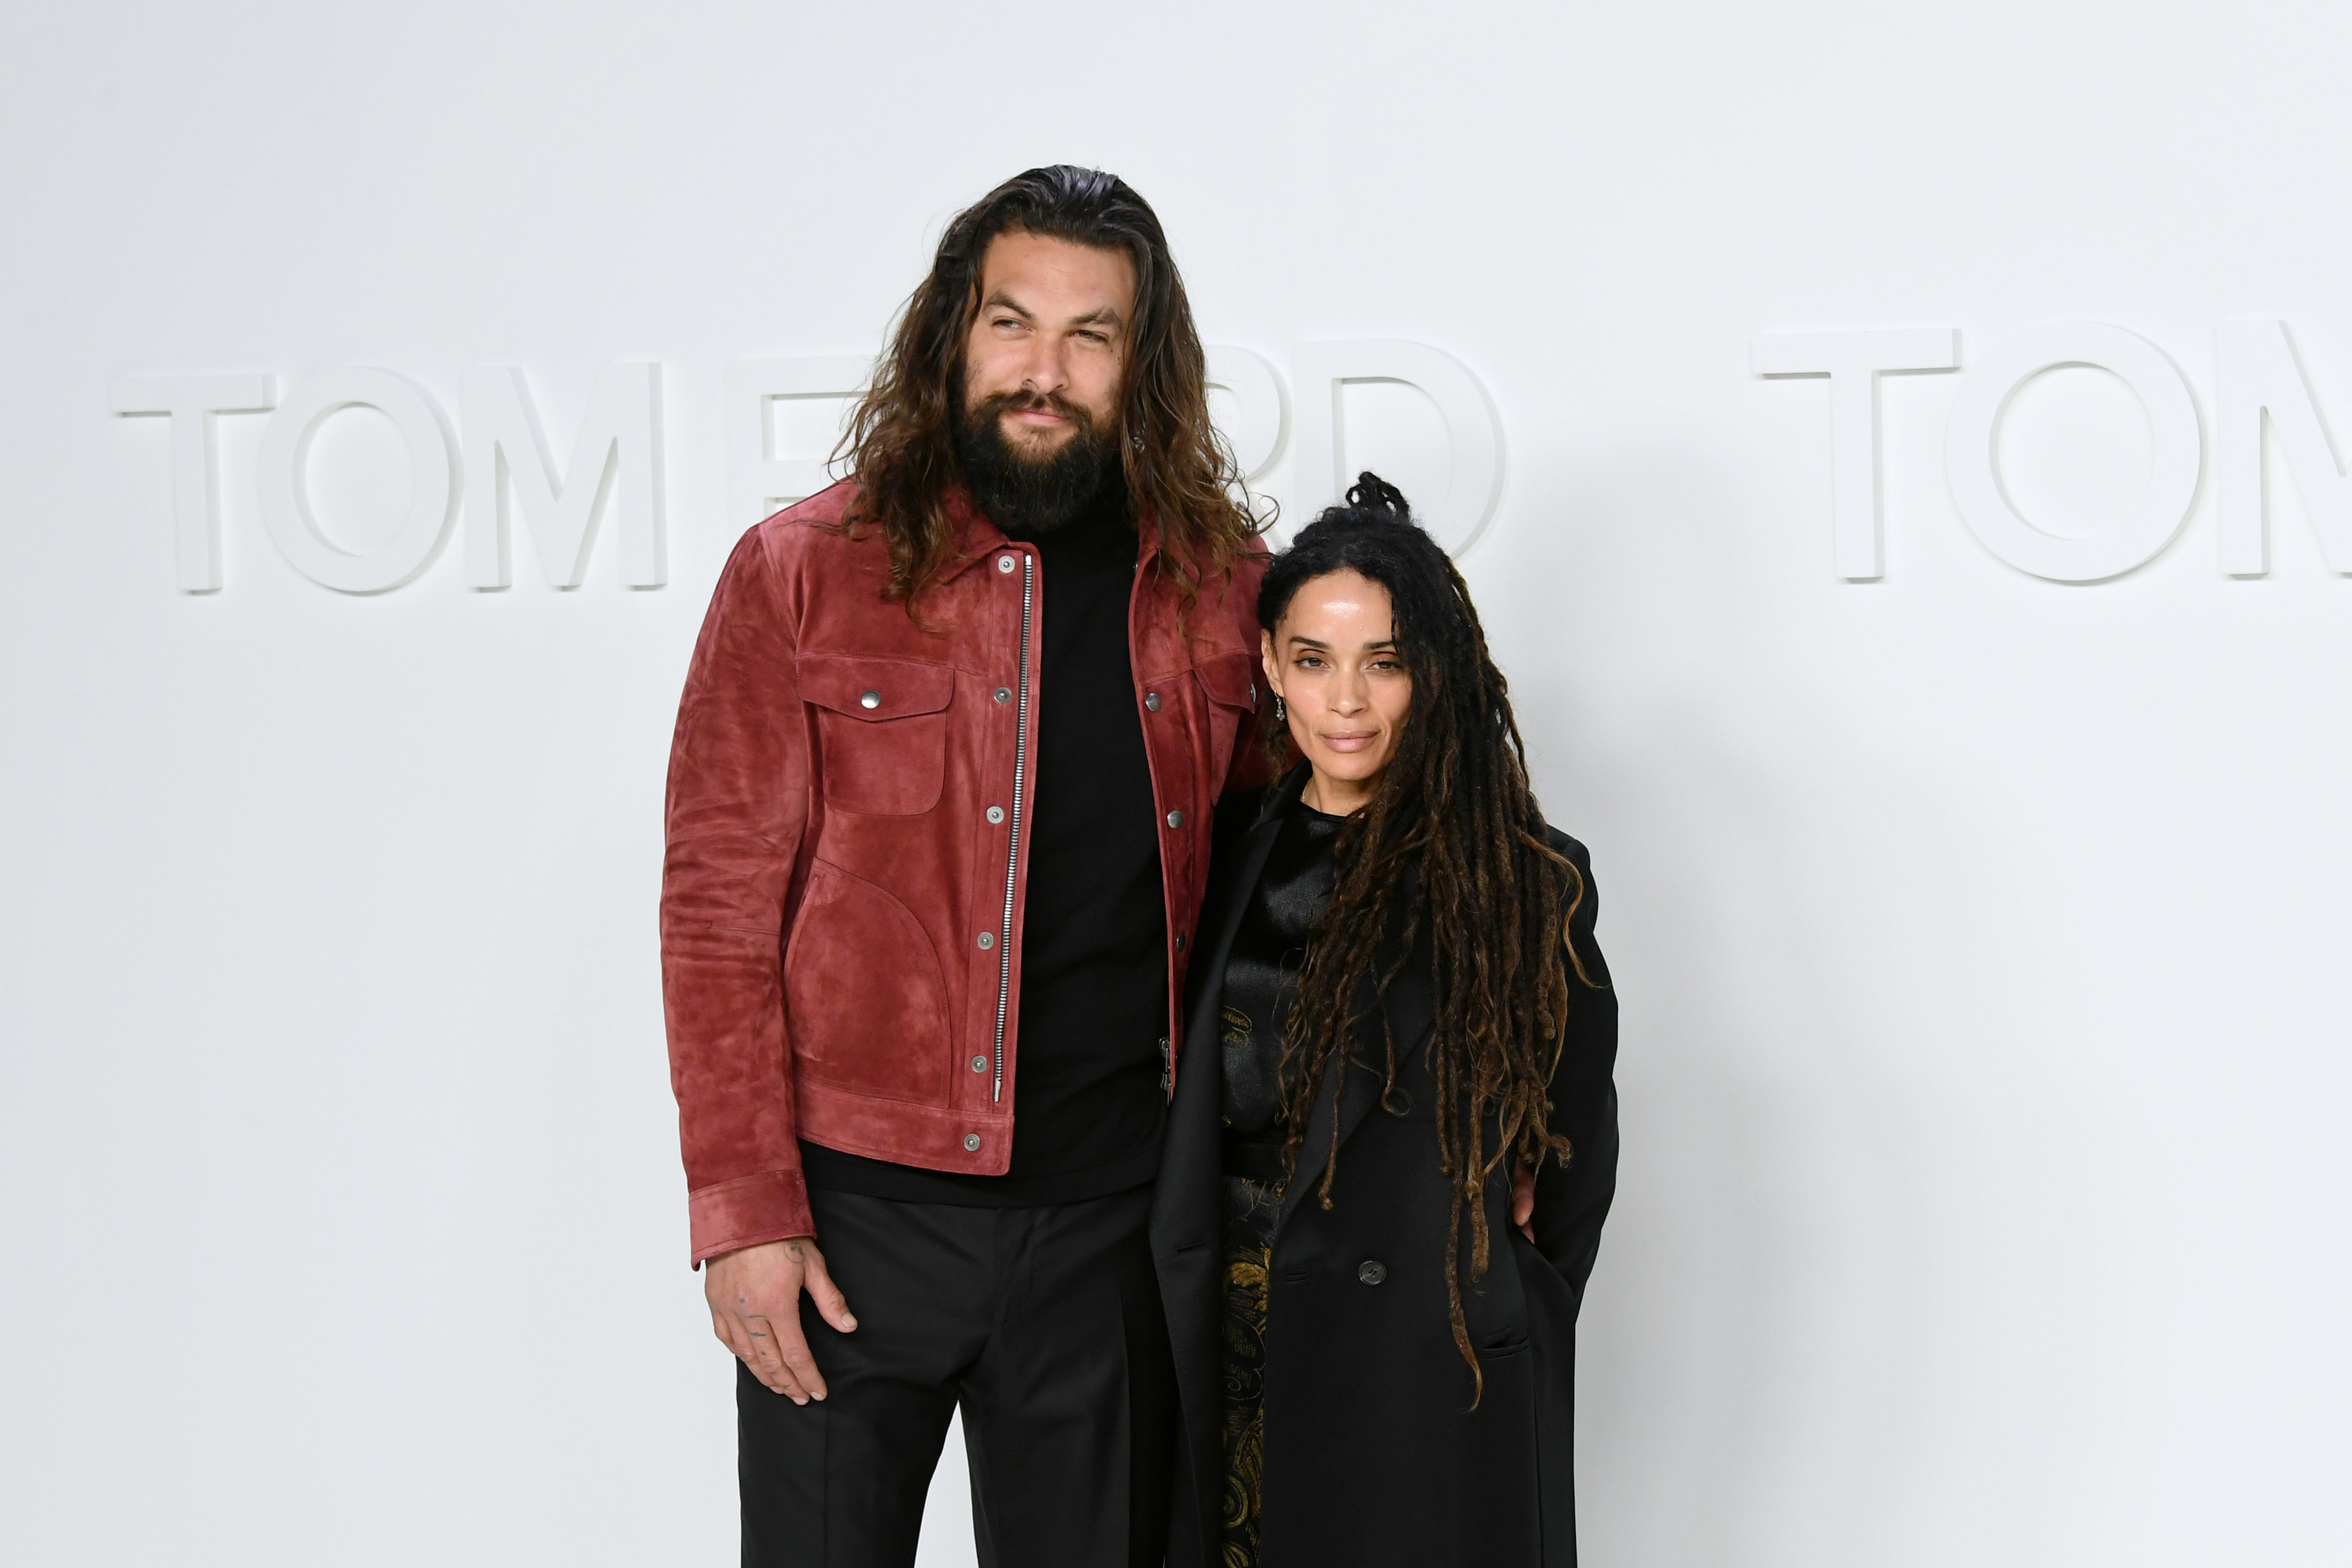 Jason Momoa and Lisa Bonet attend a Tom Ford fashion show in February 2020